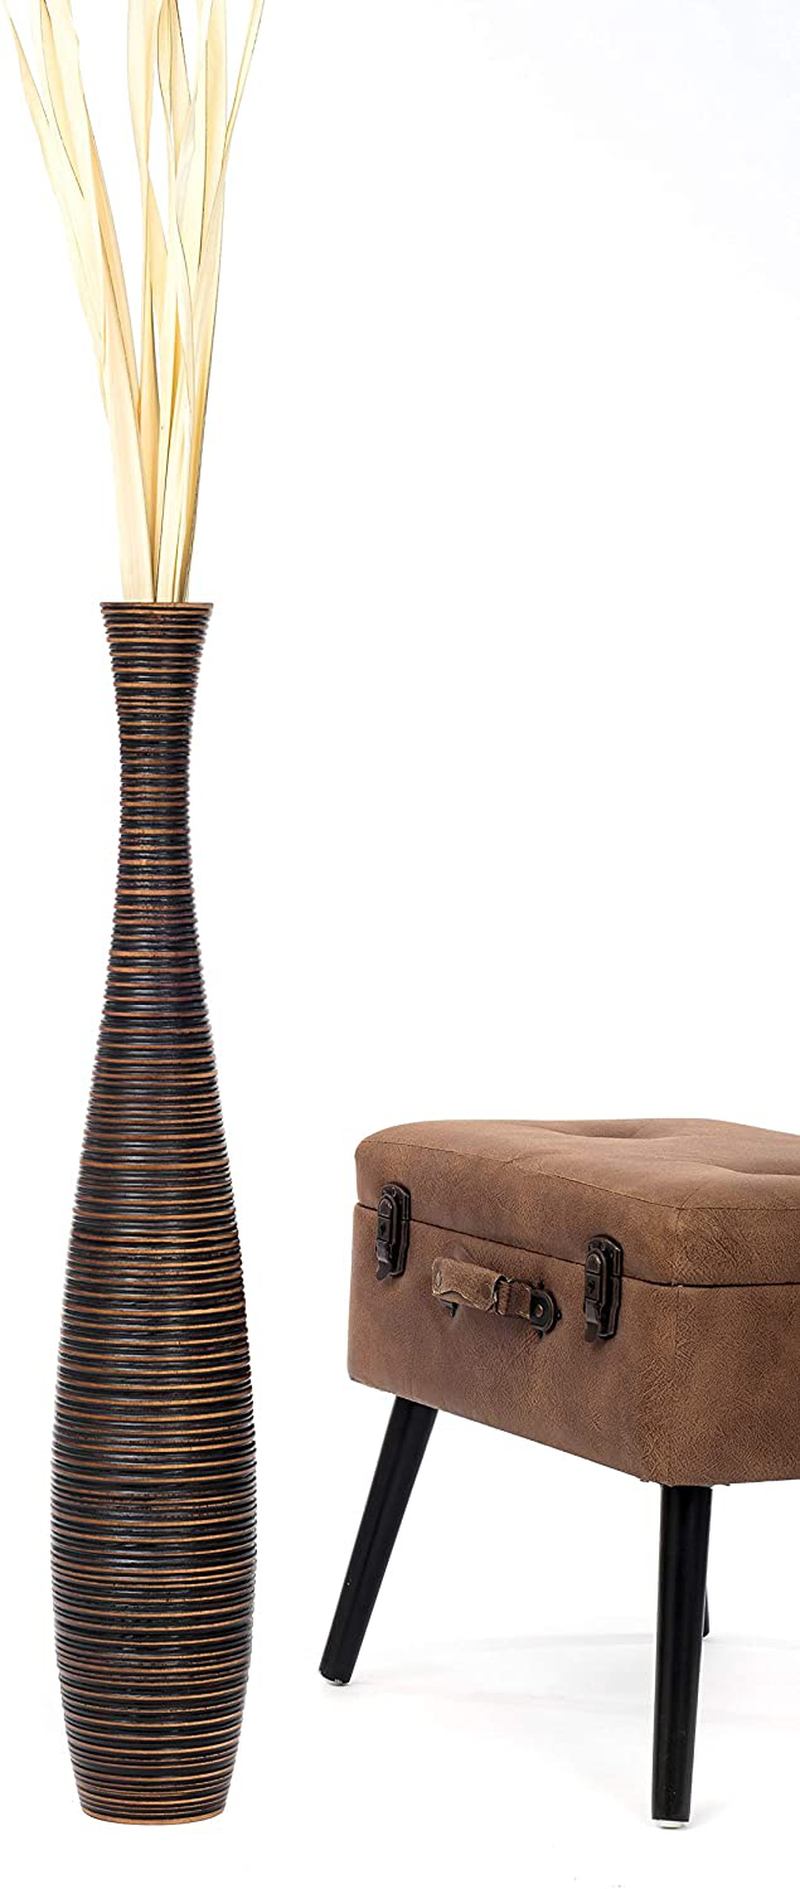 LEEWADEE Large Floor Vase – Handmade Flower Holder Made of Wood, Sophisticated Vessel for Decorative Branches and Dried Flowers, 36 inches, Brown Home & Garden > Decor > Vases LEEWADEE   